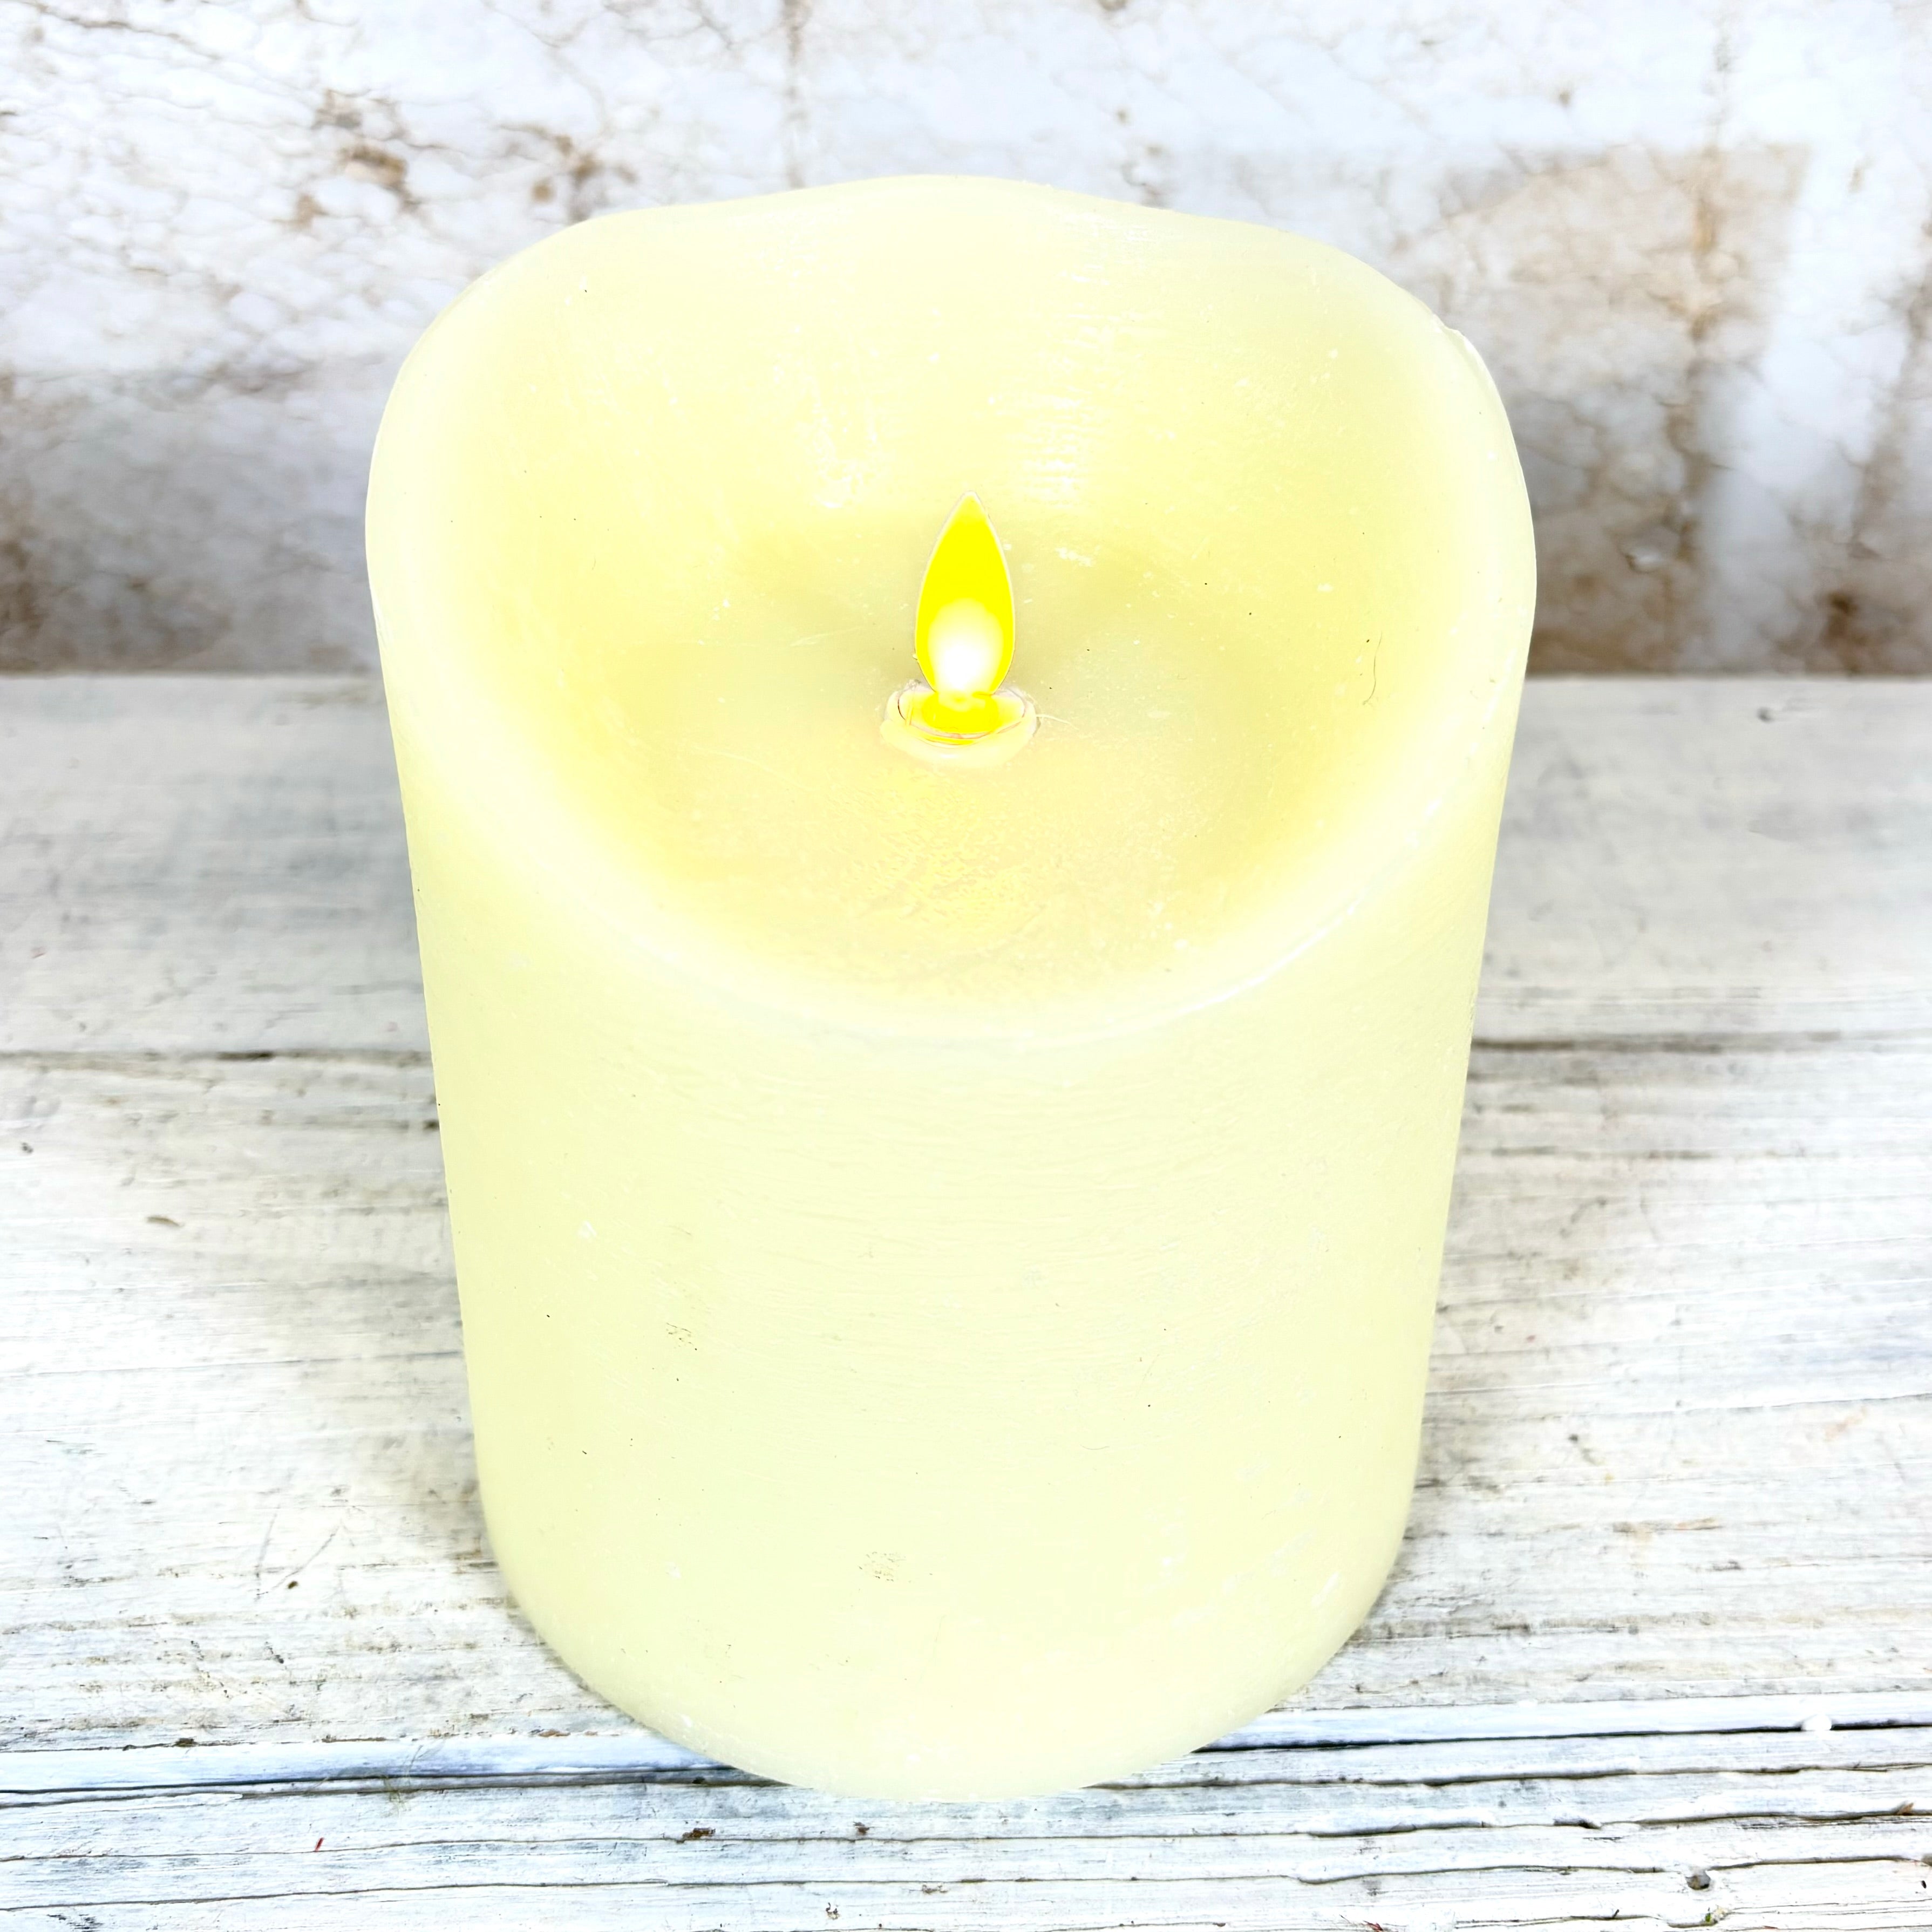 Flameless Flickering Candle with Timer Ivory Medium